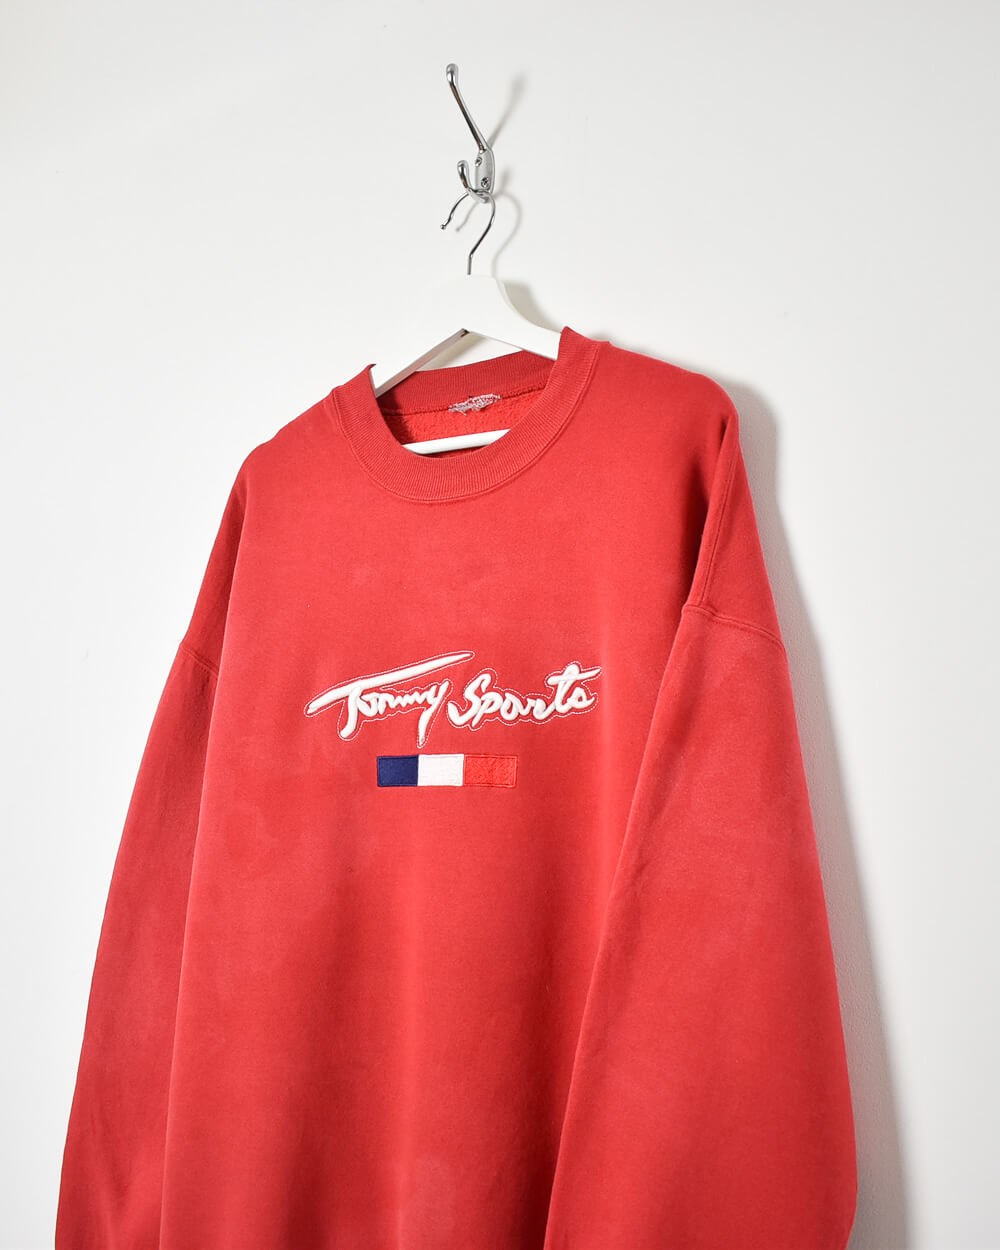 Red Tommy Sports Sweatshirt - X-Large